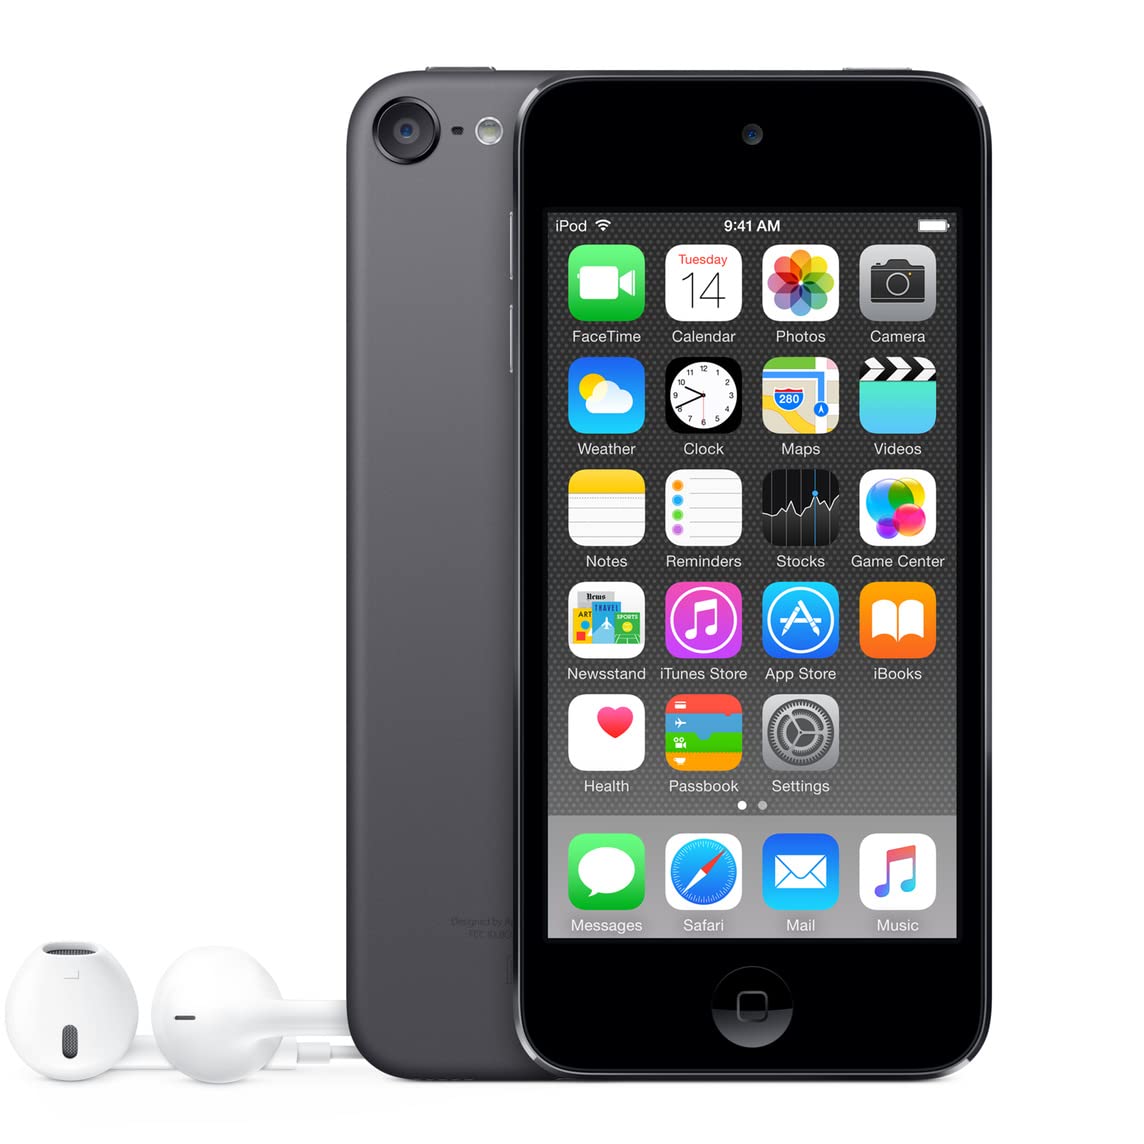 Apple iPod Touch 16GB 6th Generation with Accessory Bundle - Space Gray (Refurbished)